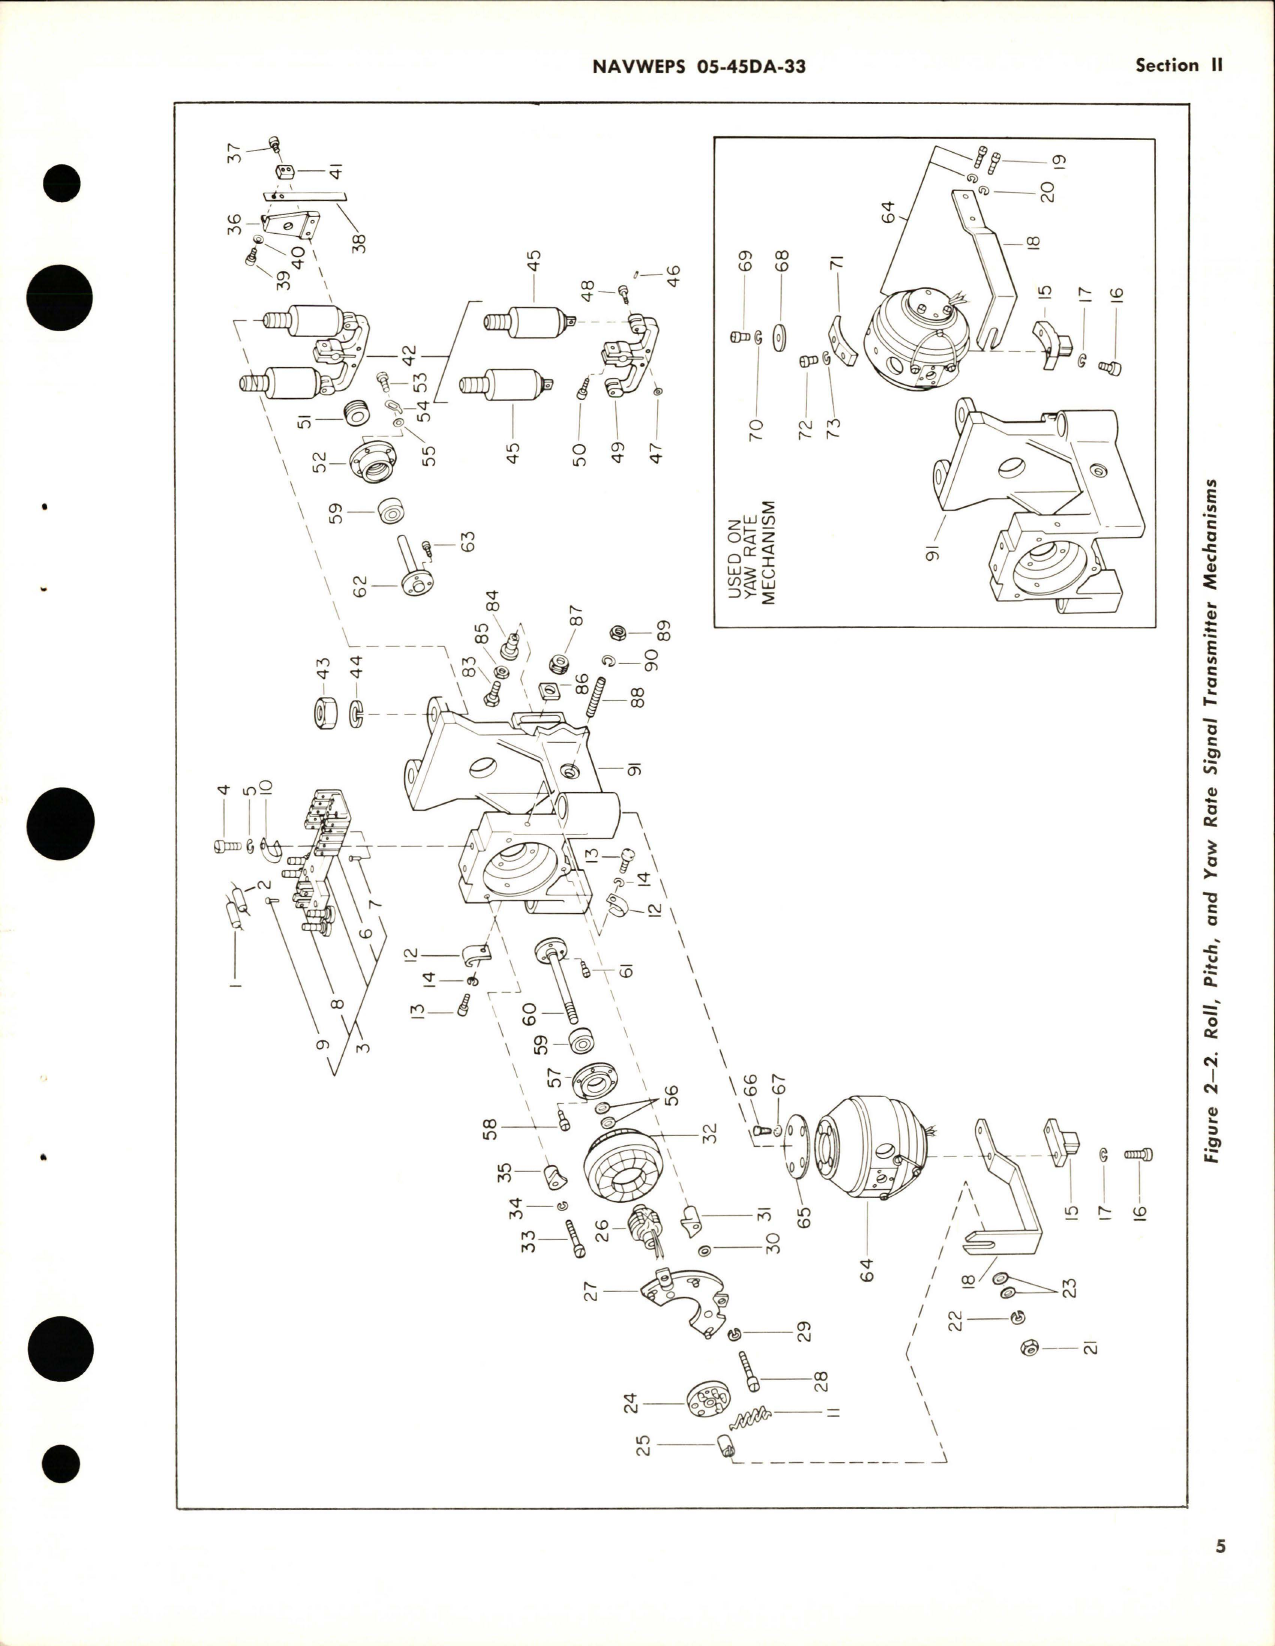 Sample page 9 from AirCorps Library document: Overhaul Instructions for Three Axis Rate Control - Parts 15822-3-A and 15822-3-B